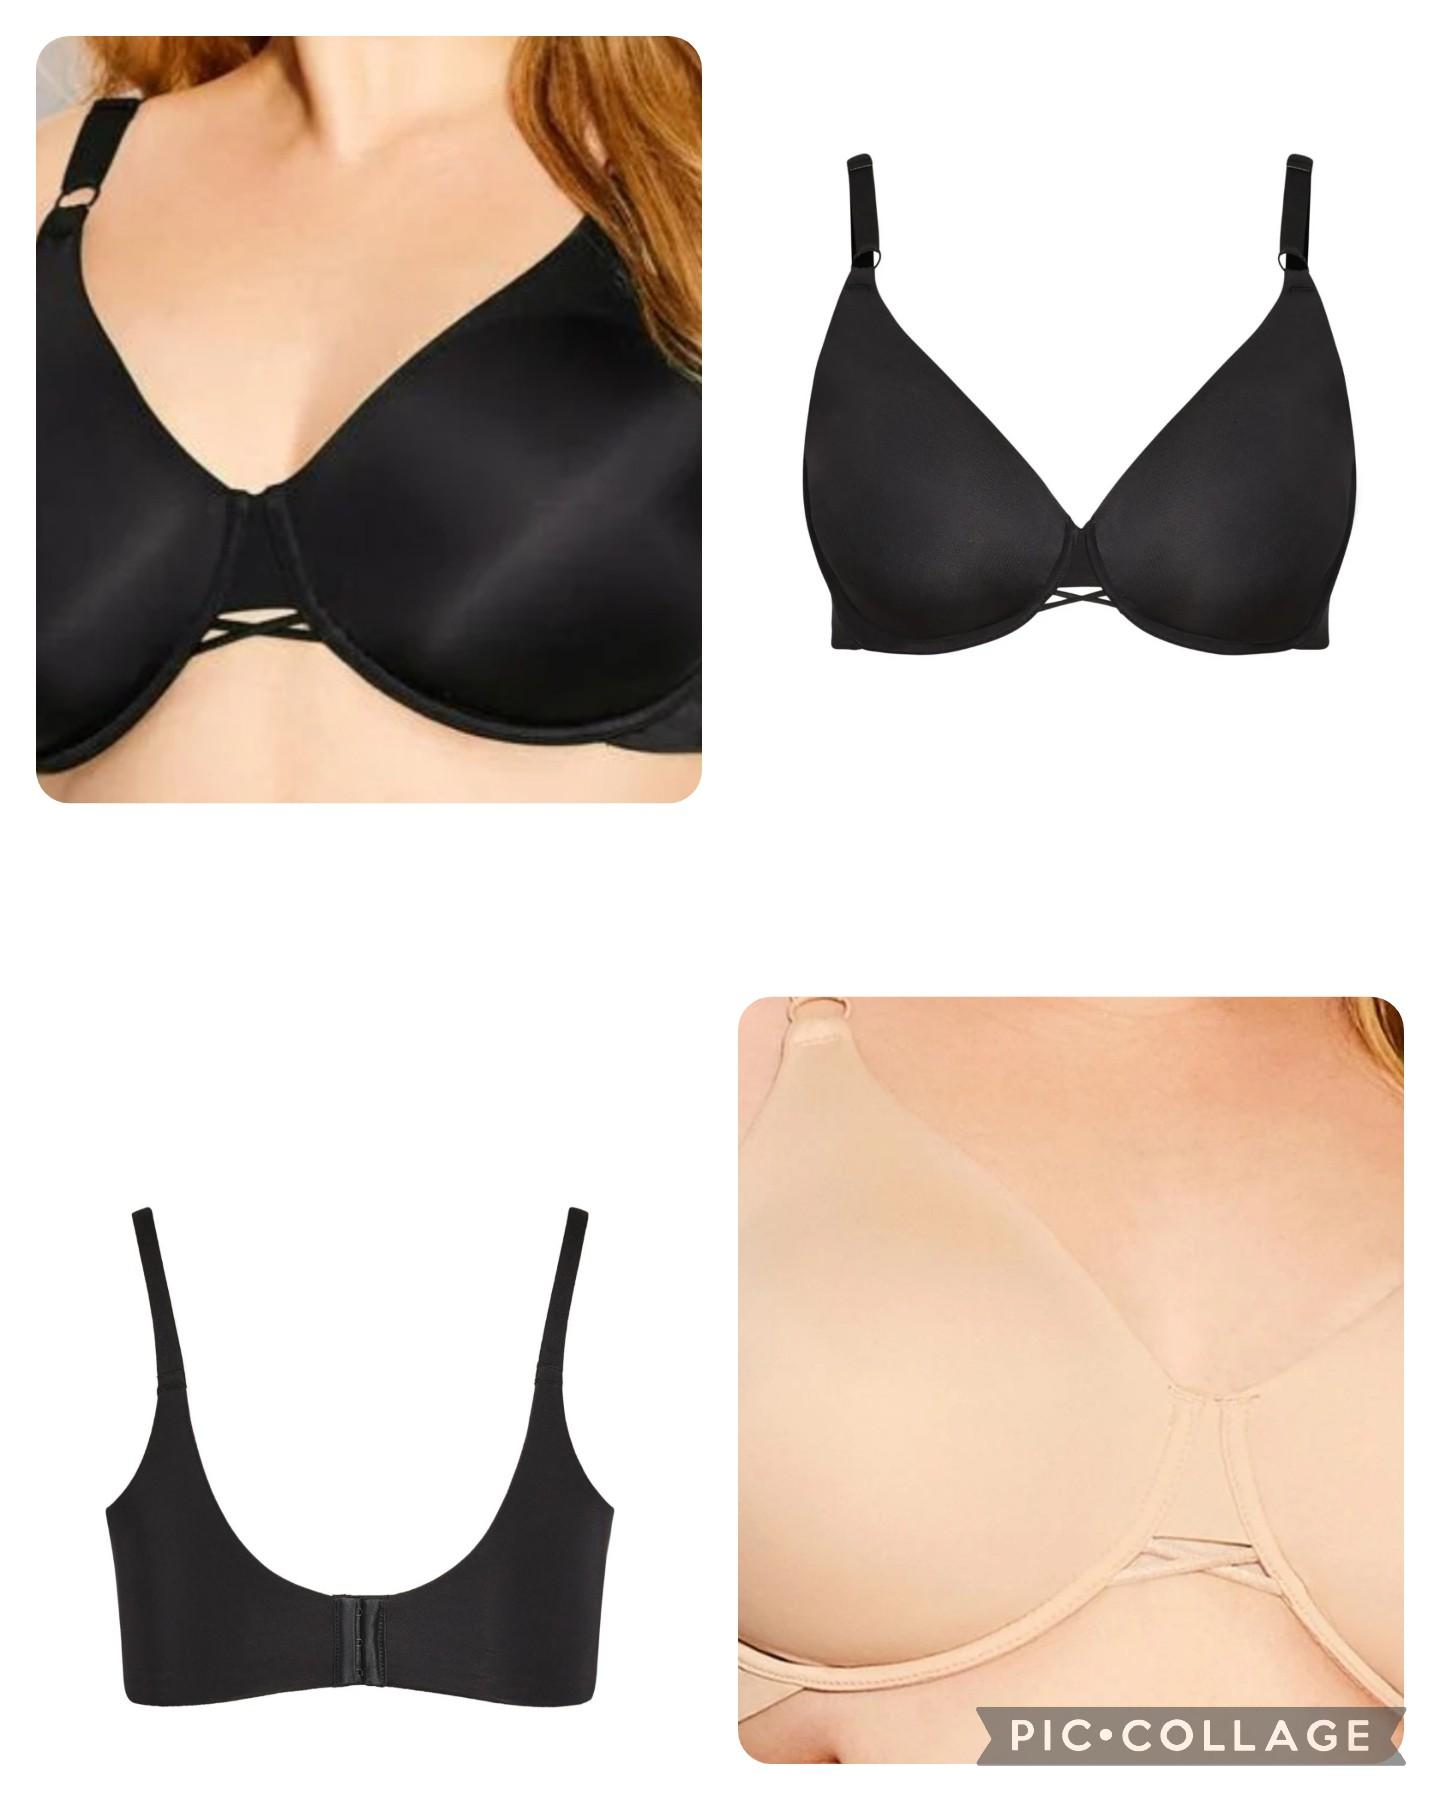 Avenue: 2 back smoother bras size 42DD in ST7 Kidsgrove for £15.00